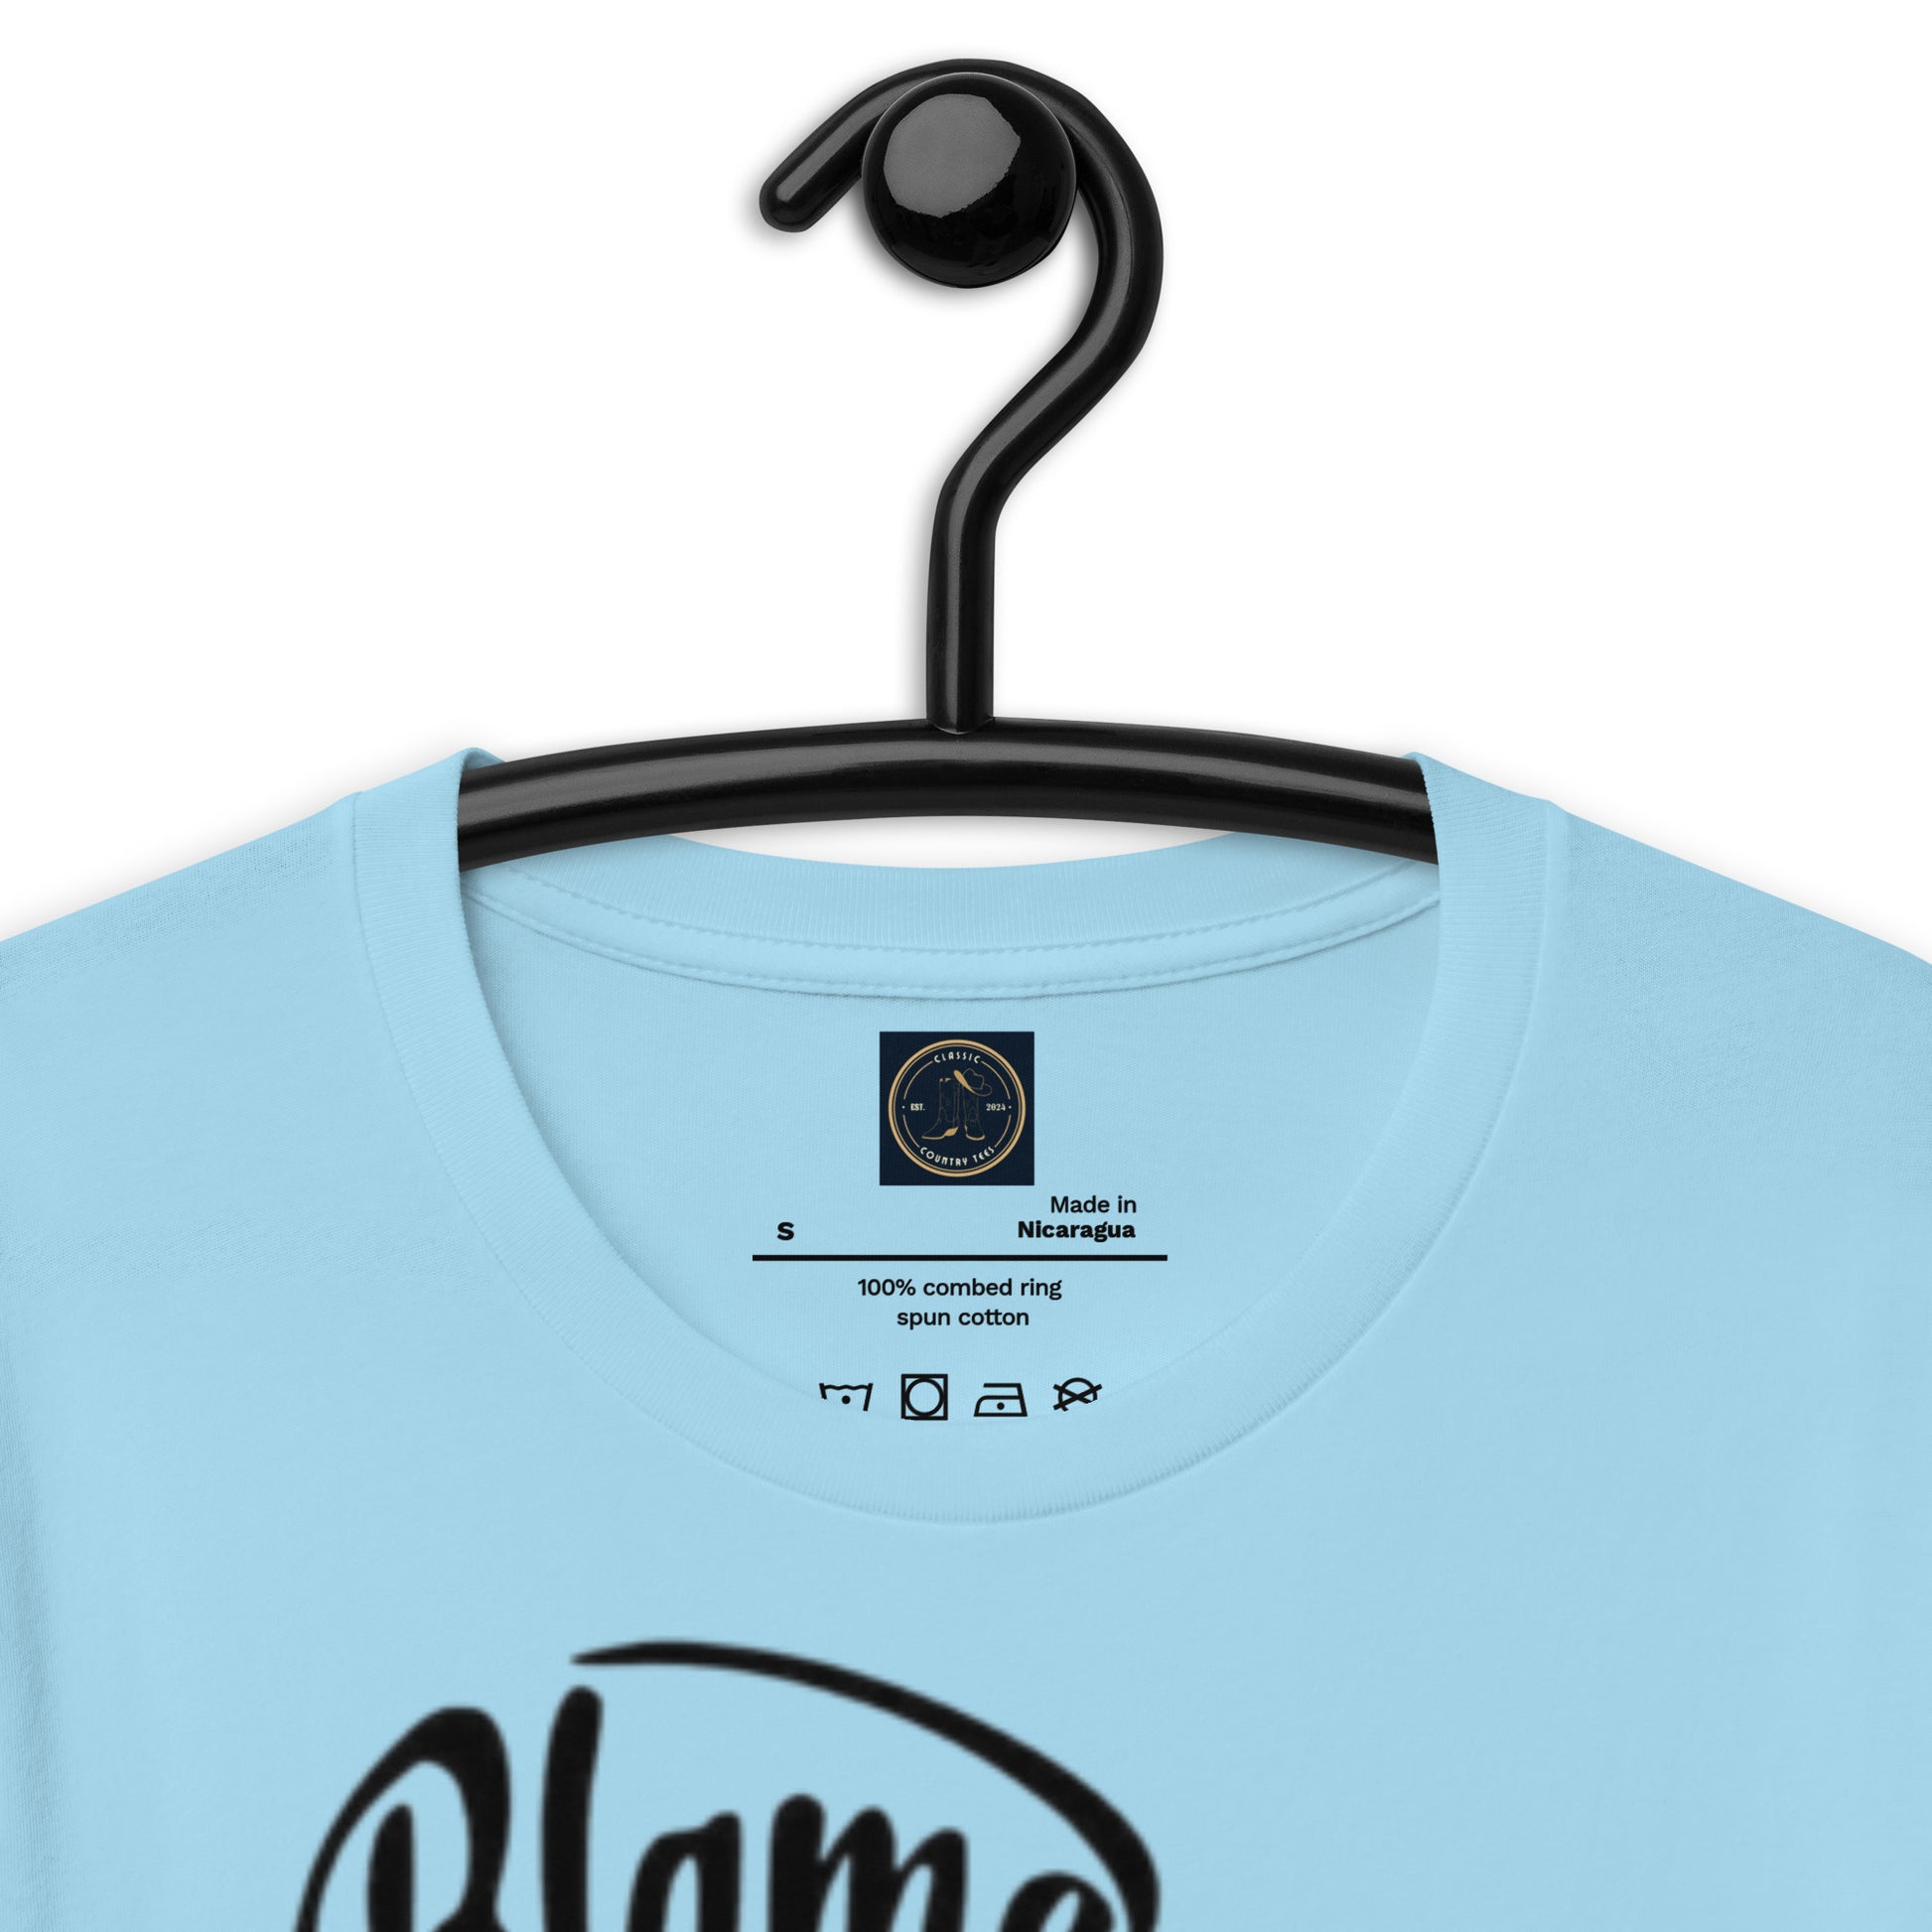 Blame It All On My Roots (alt) - Get Your Twang On with Classic Country Tees - The Ultimate Unisex T-Shirt for True Country Souls! - Classic Country Tees